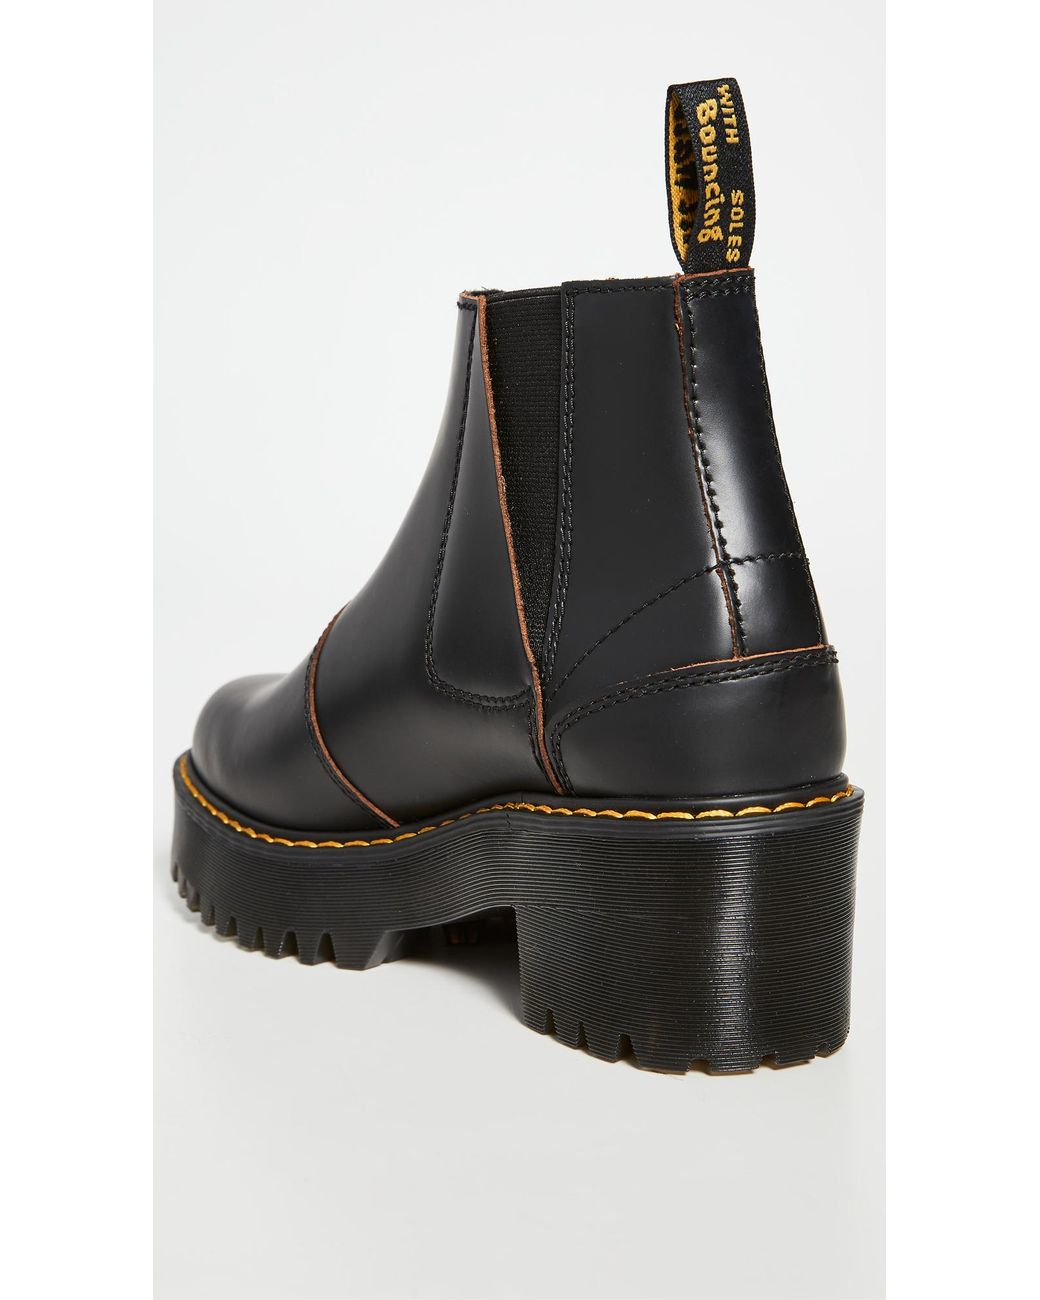 Dr. Martens Leather Rometty Ii Chelsea Boots in Black Vintage (Black) | Lyst